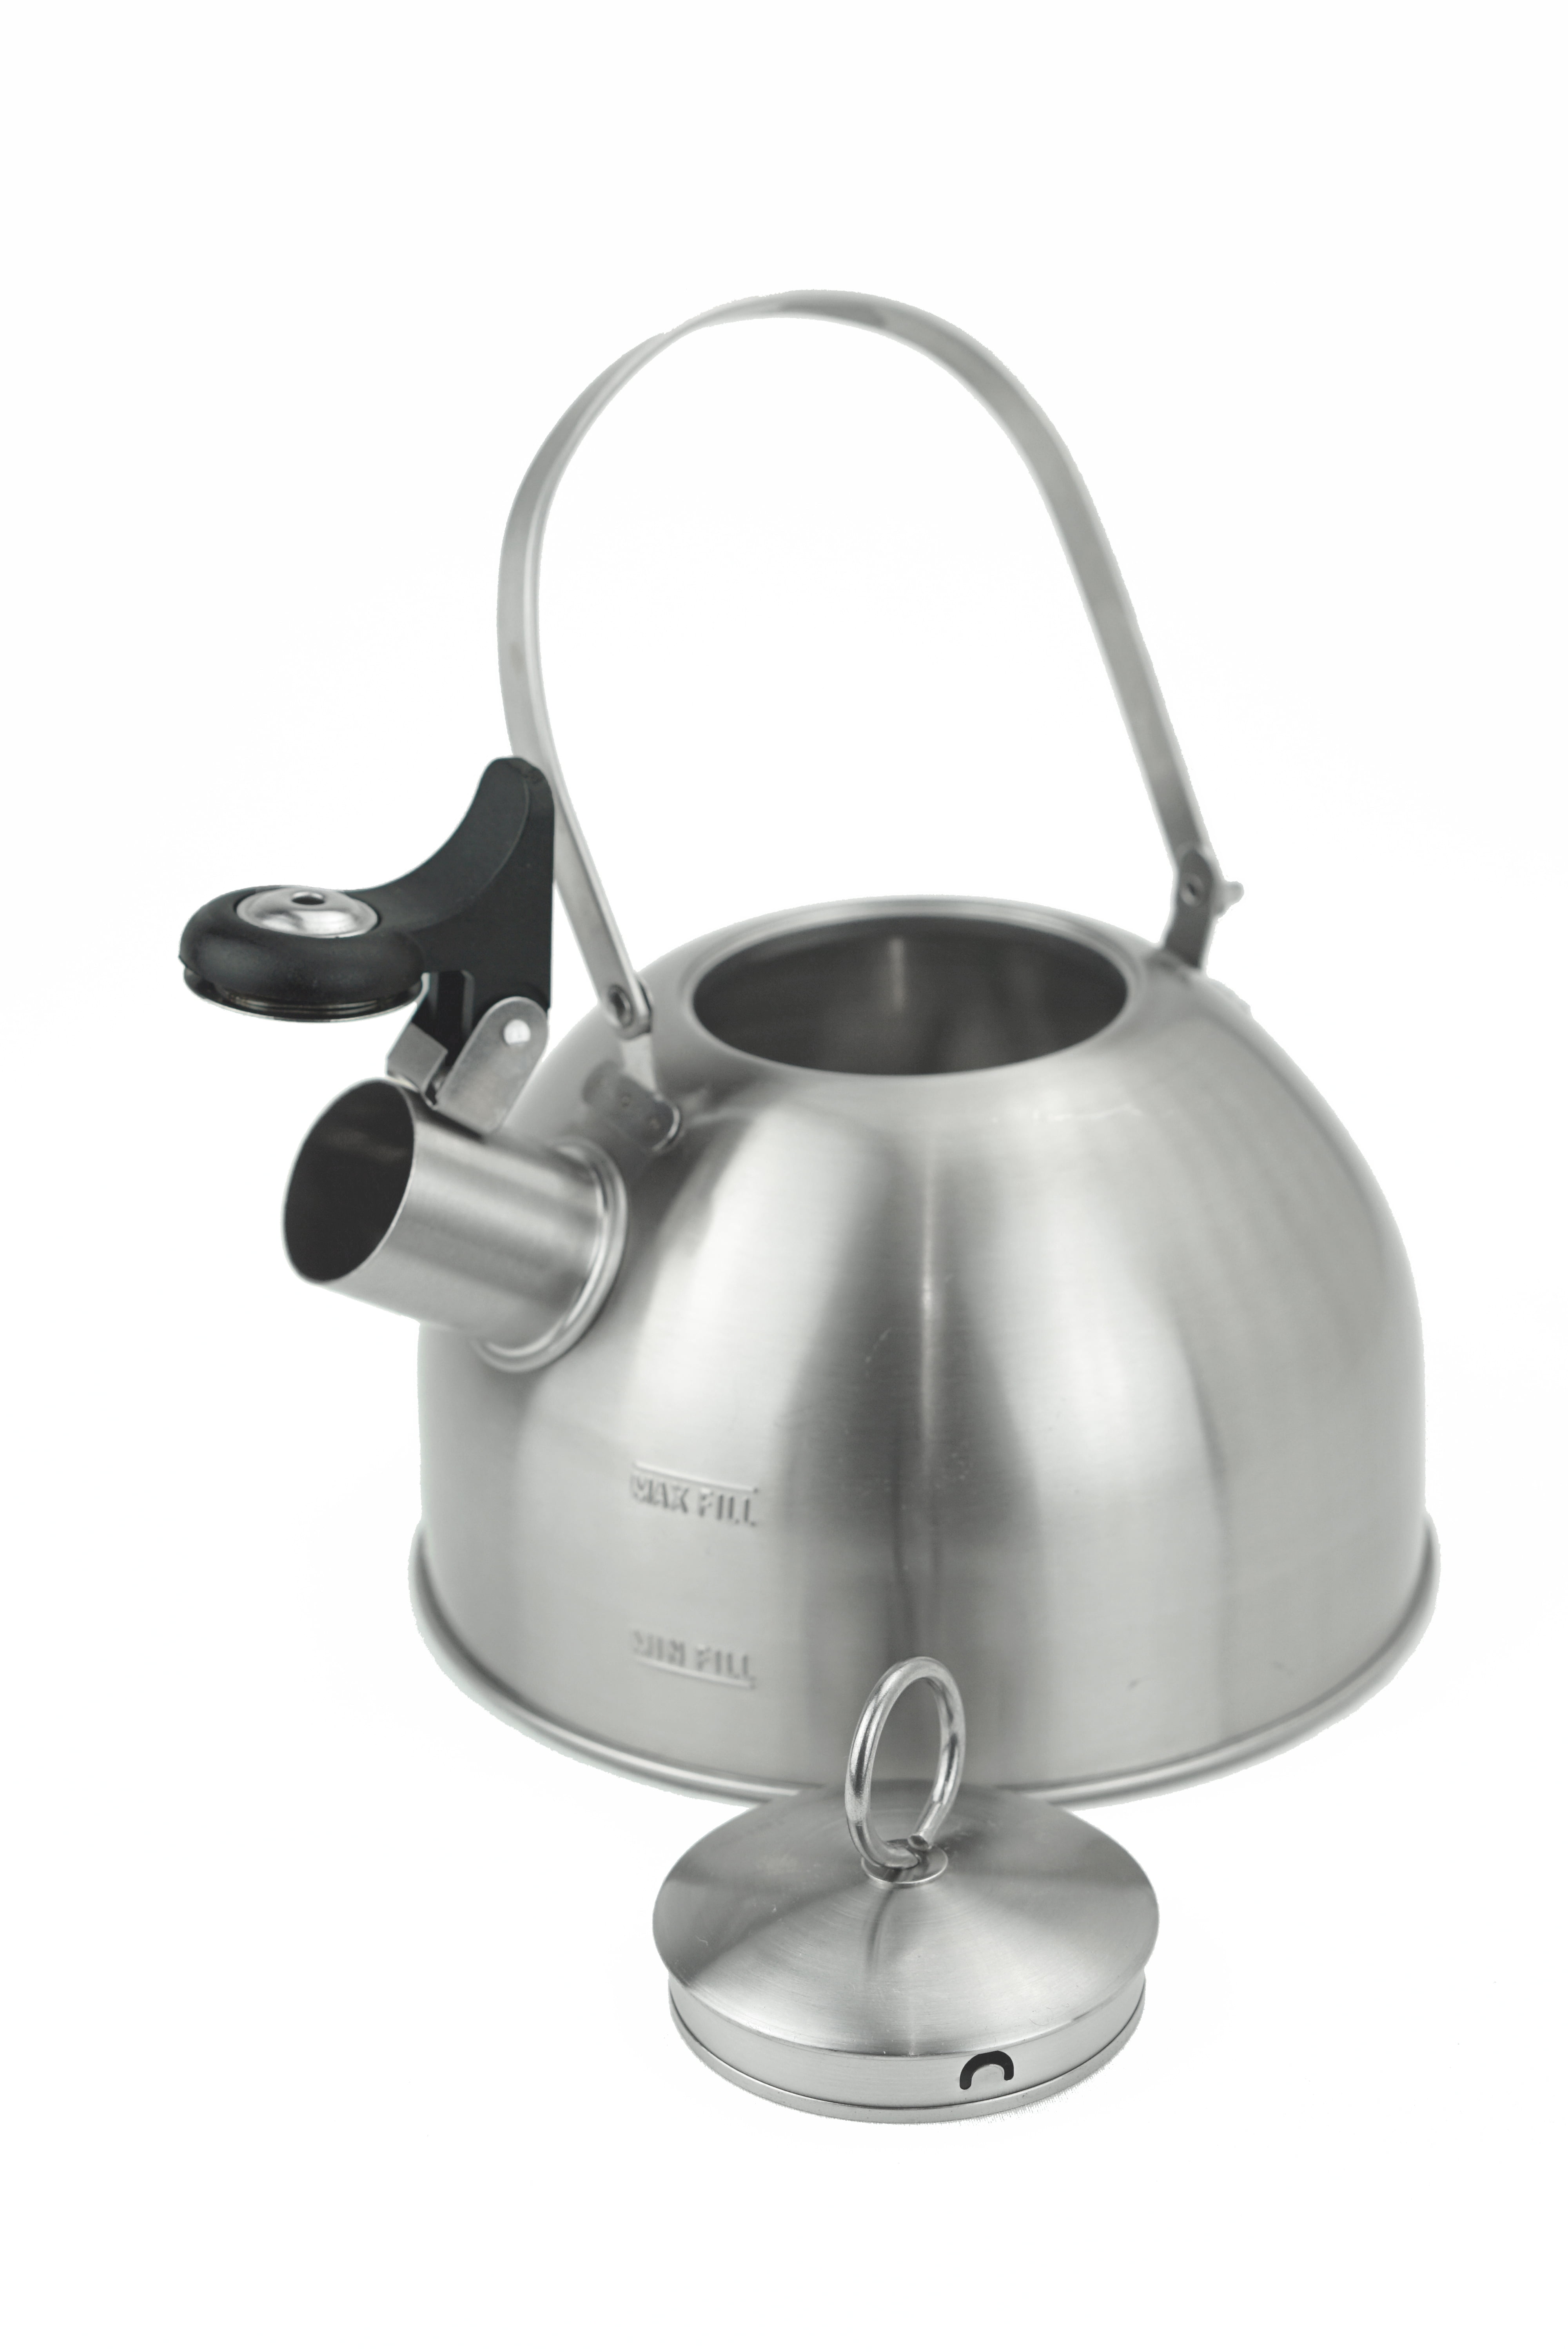 Portable Camping Kettle Camp Tea Pot Stain Resistant Water Boiler Stainless Steel Tea Kettle for Campfire Hiking Backpacking Travel Cooking Black